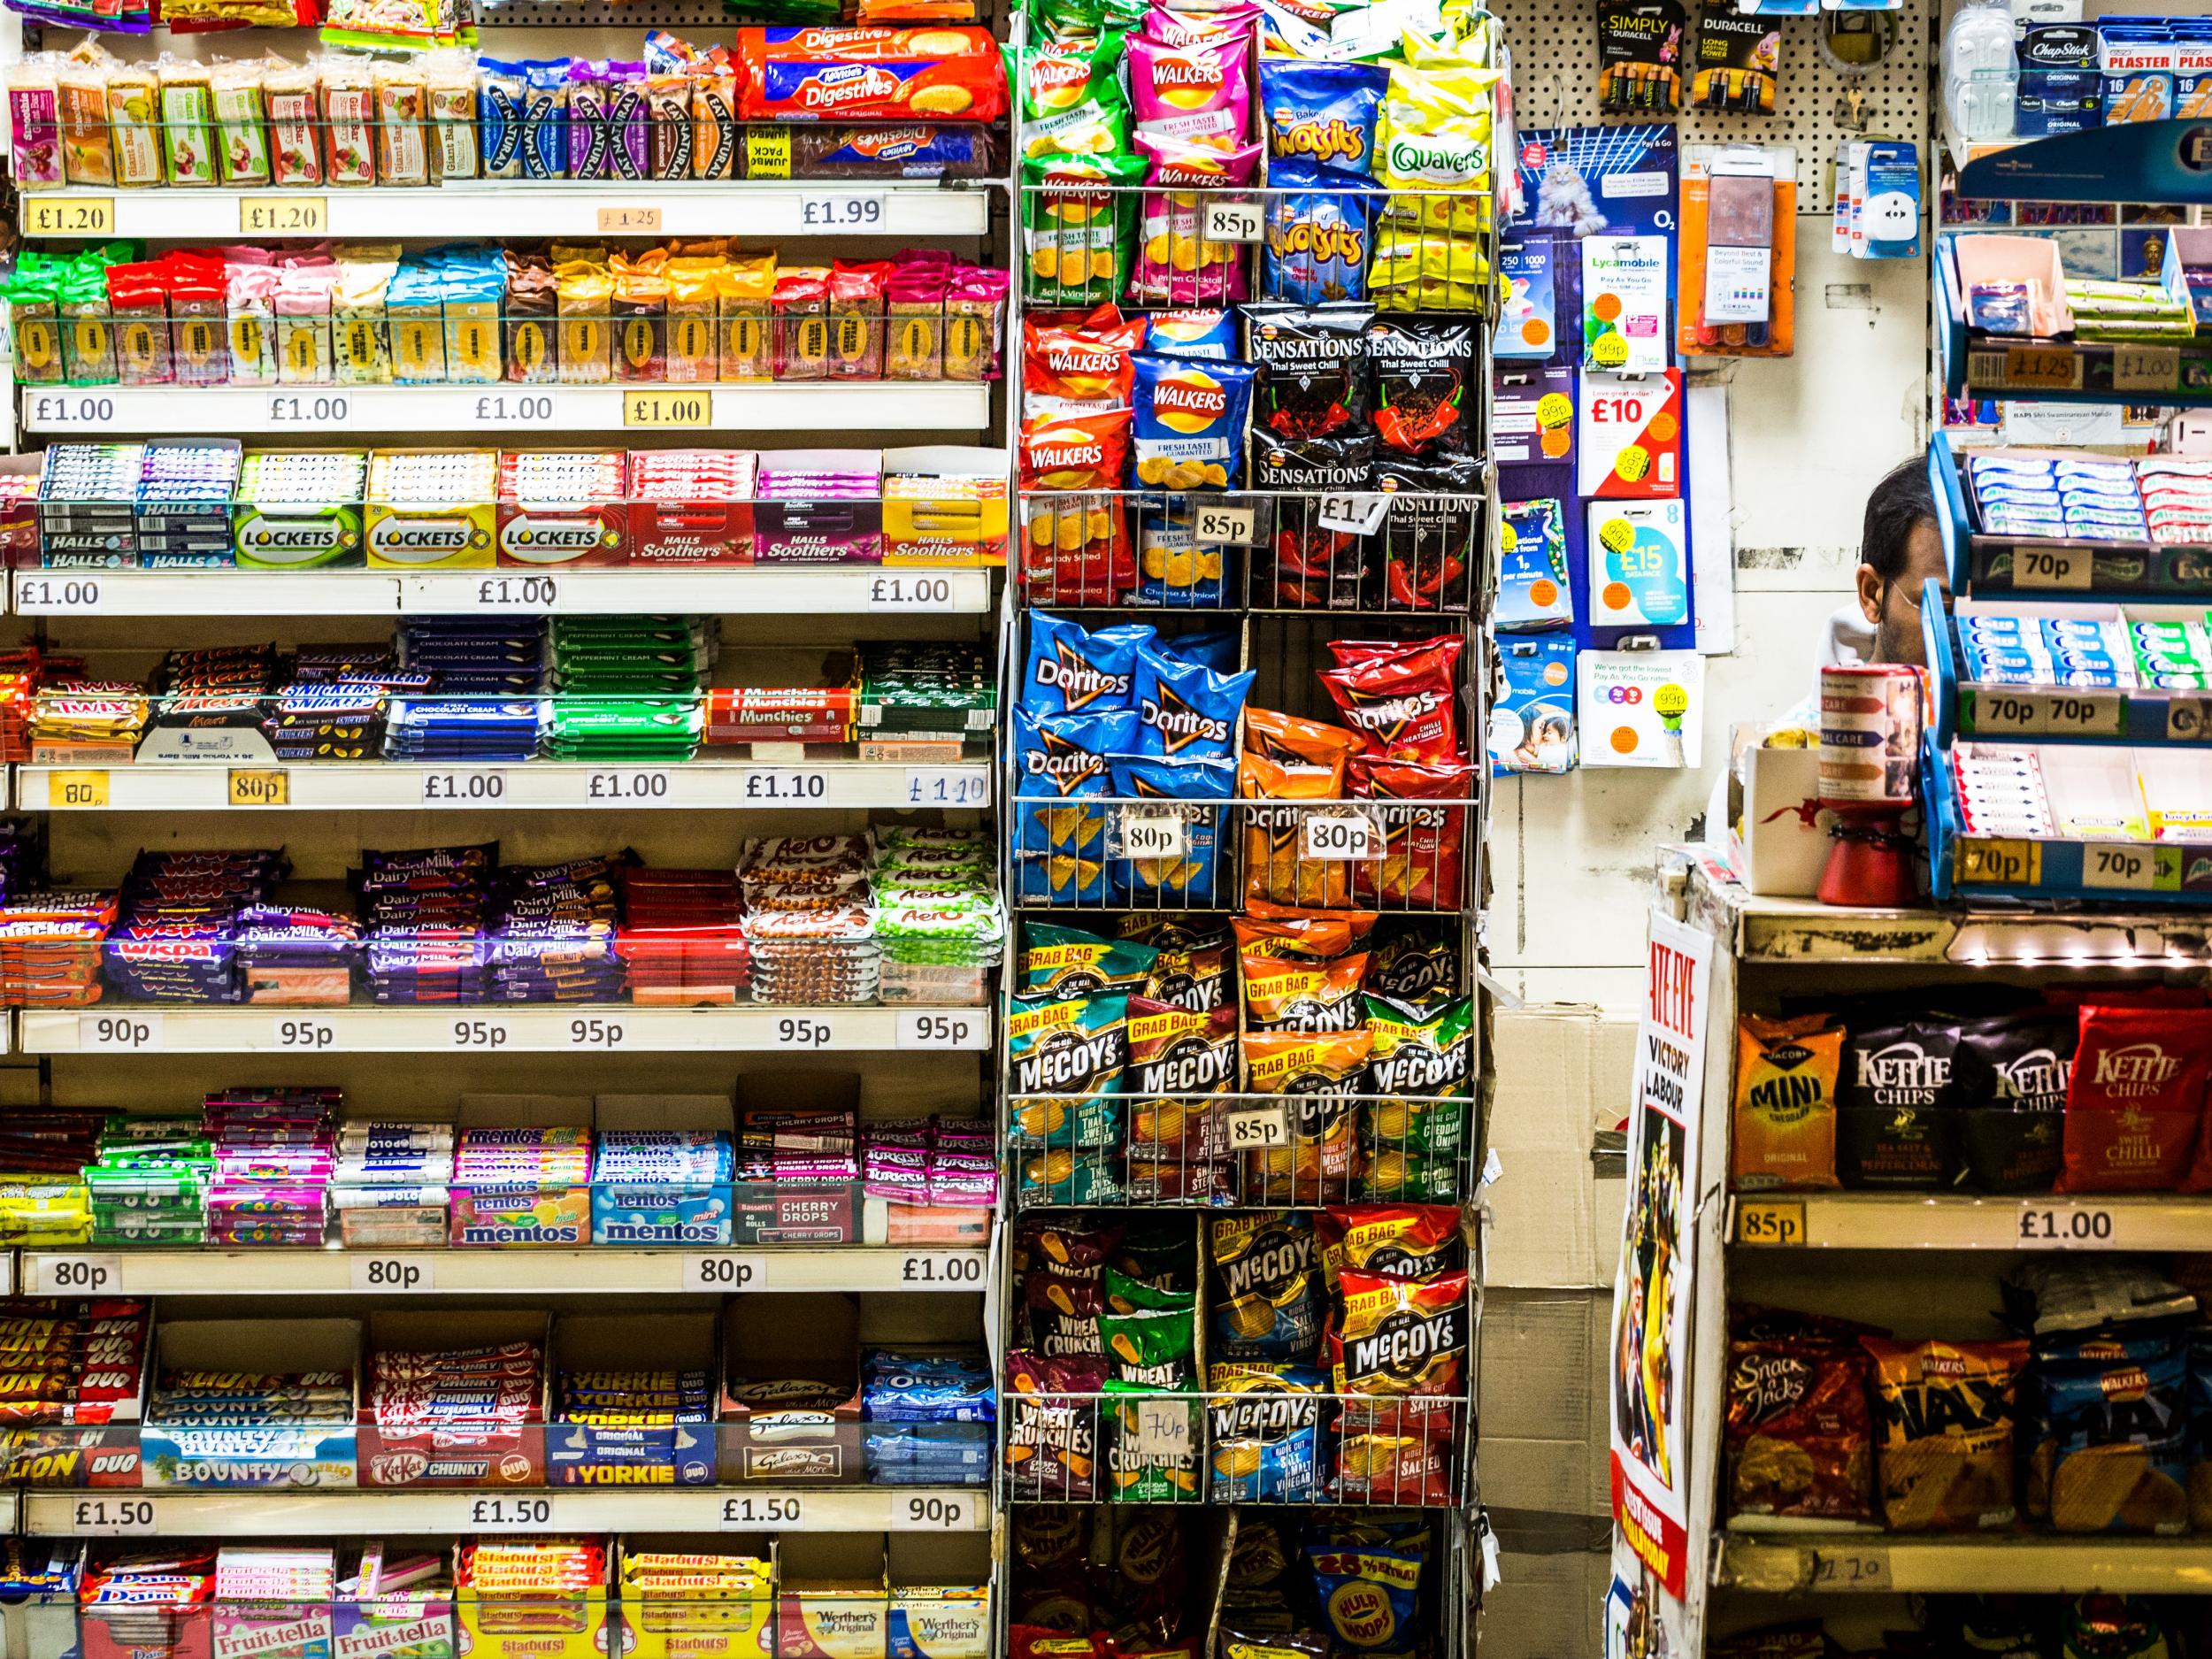 &#13;
Our sweets and treats aisles don’t need to be filled with plastic &#13;